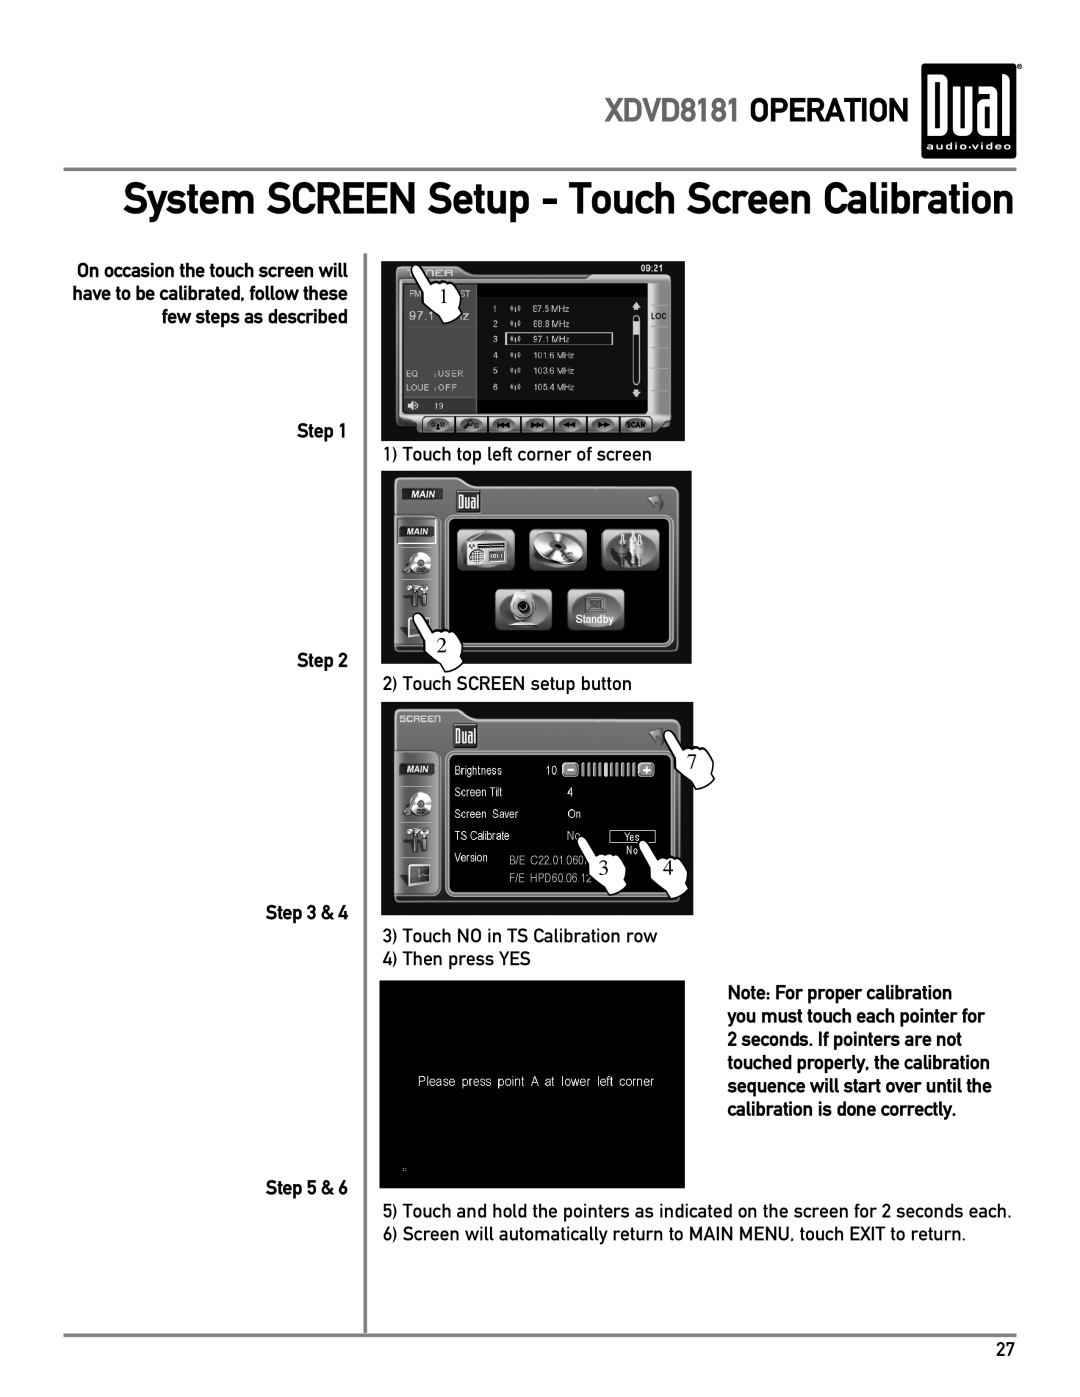 Dual owner manual System SCREEN Setup - Touch Screen Calibration, XDVD8181 OPERATION, Step Step & Step 